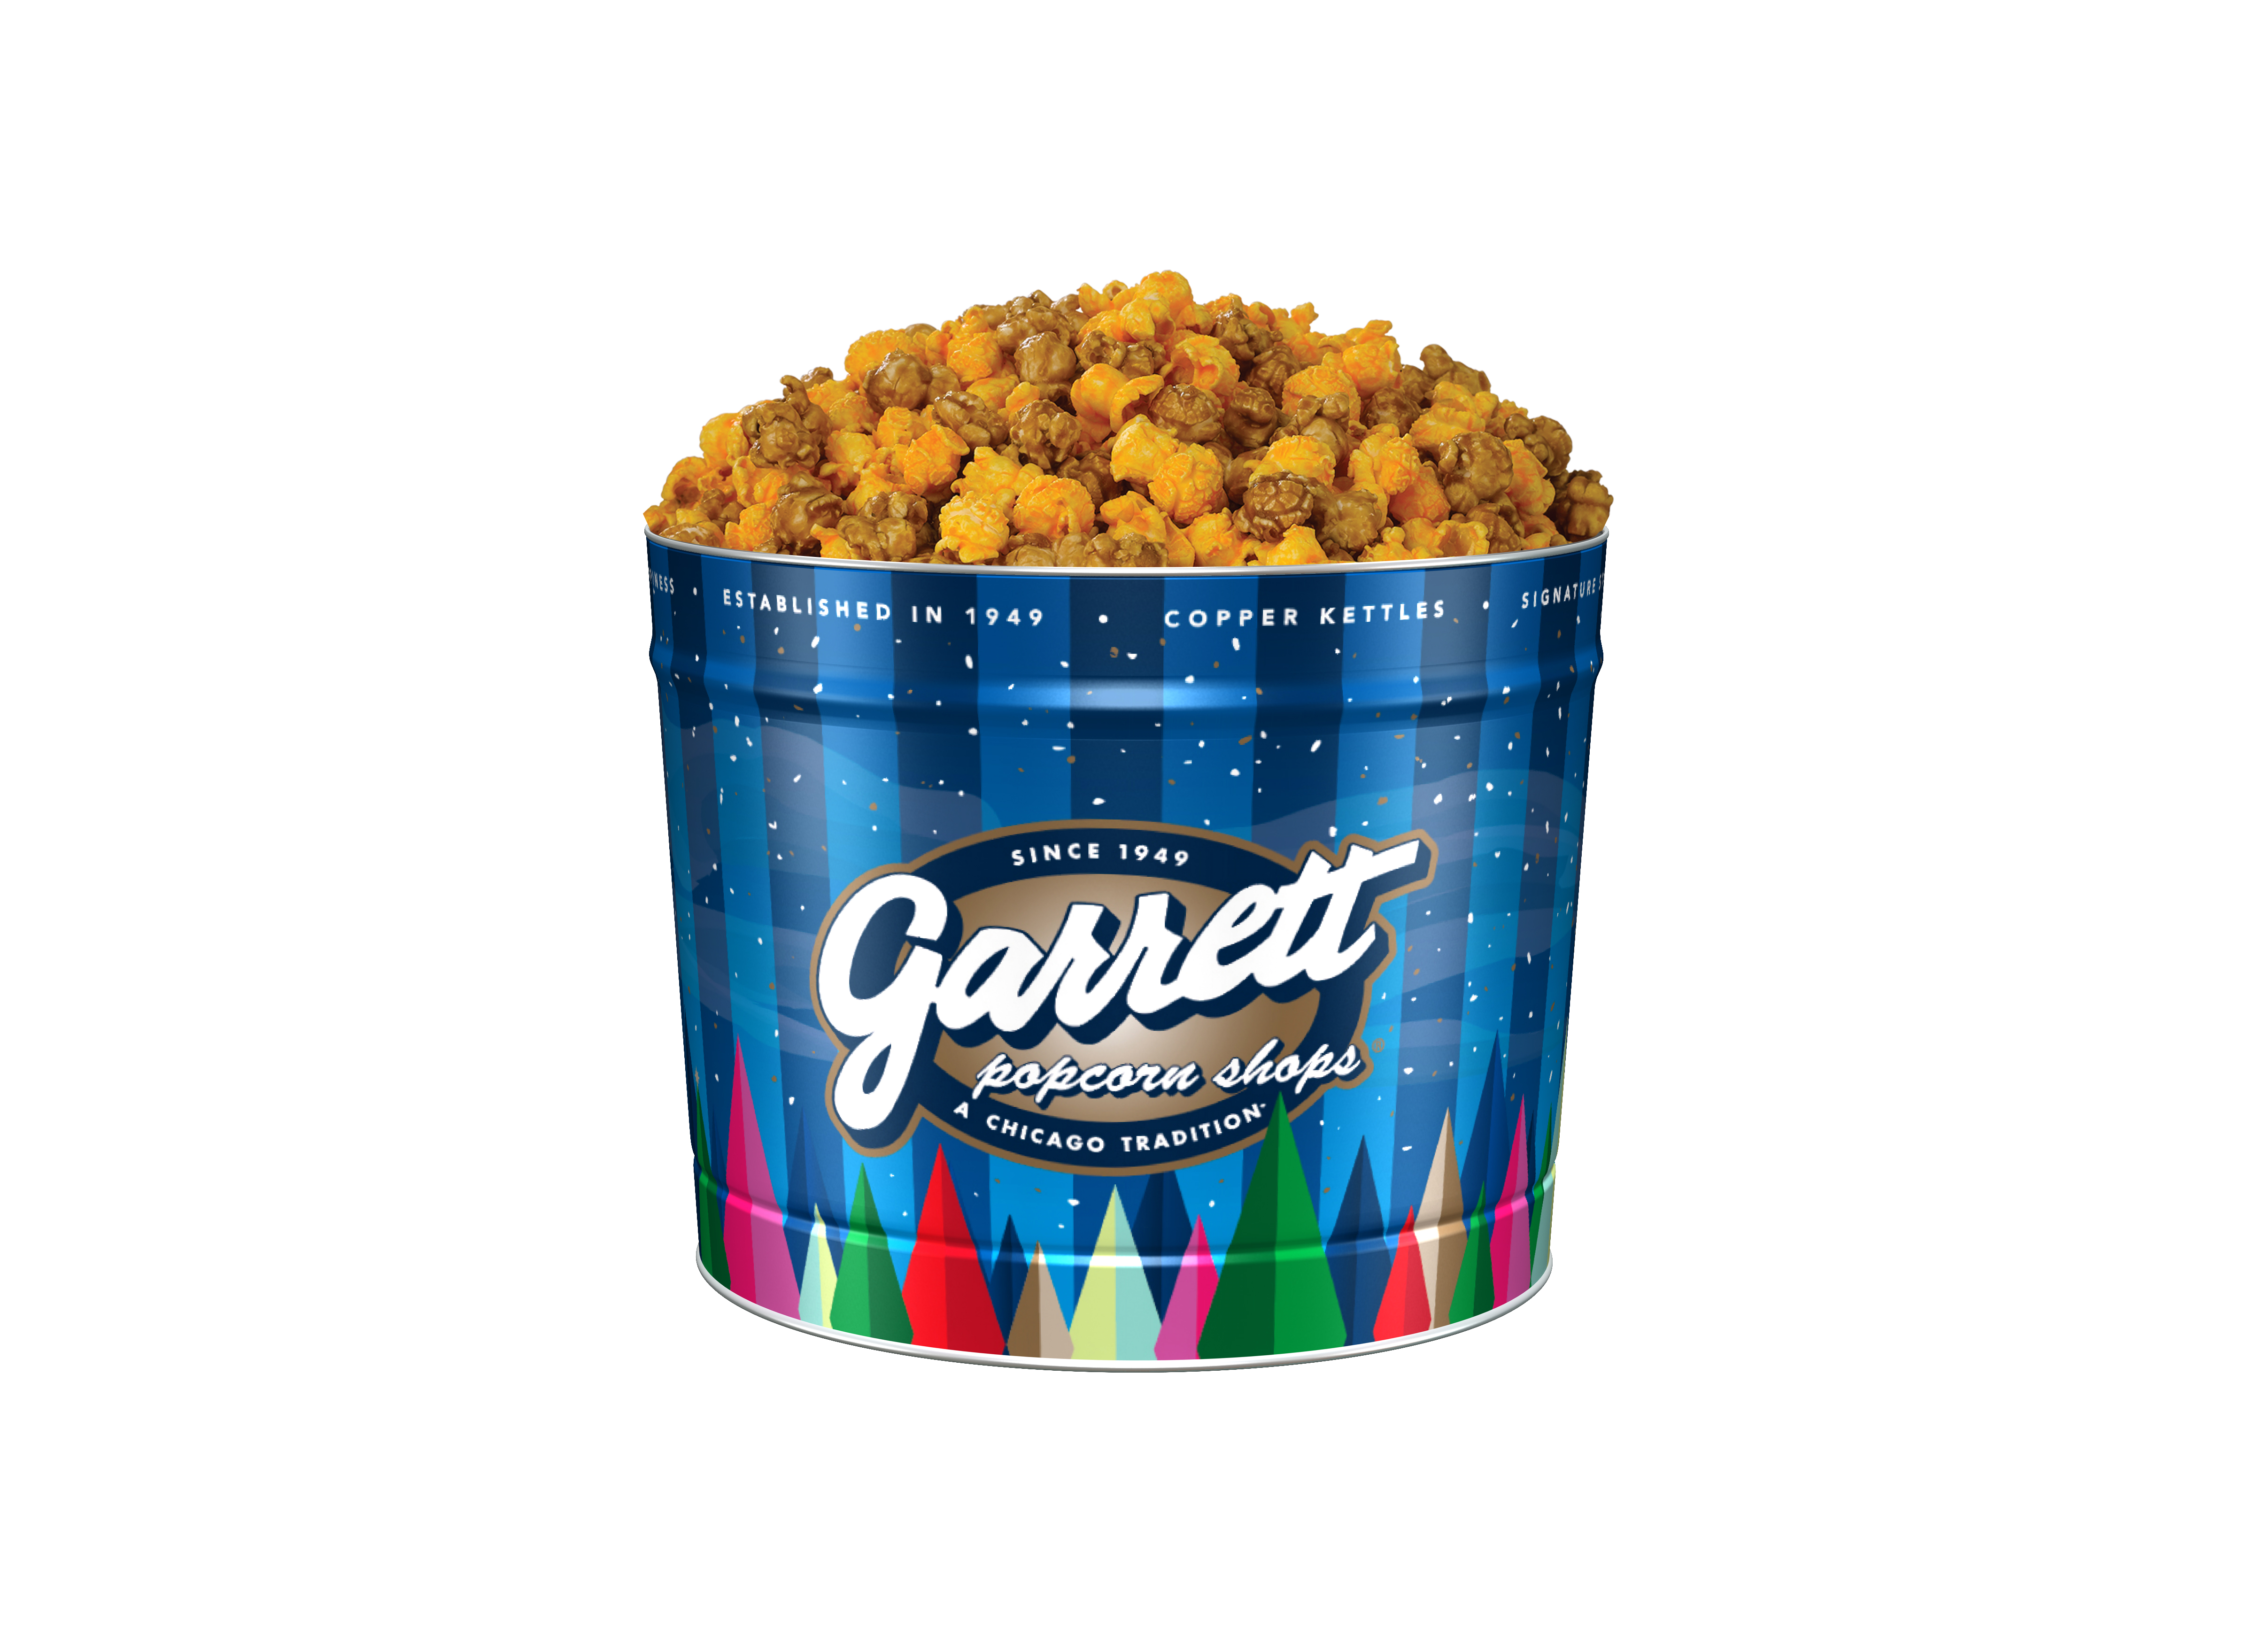 Wide tin with vertical blue stripes, multicolor stylized trees along bottom, and Garrett Popcorn Shops logo in center, heaped with Garrett Mix popcorn.